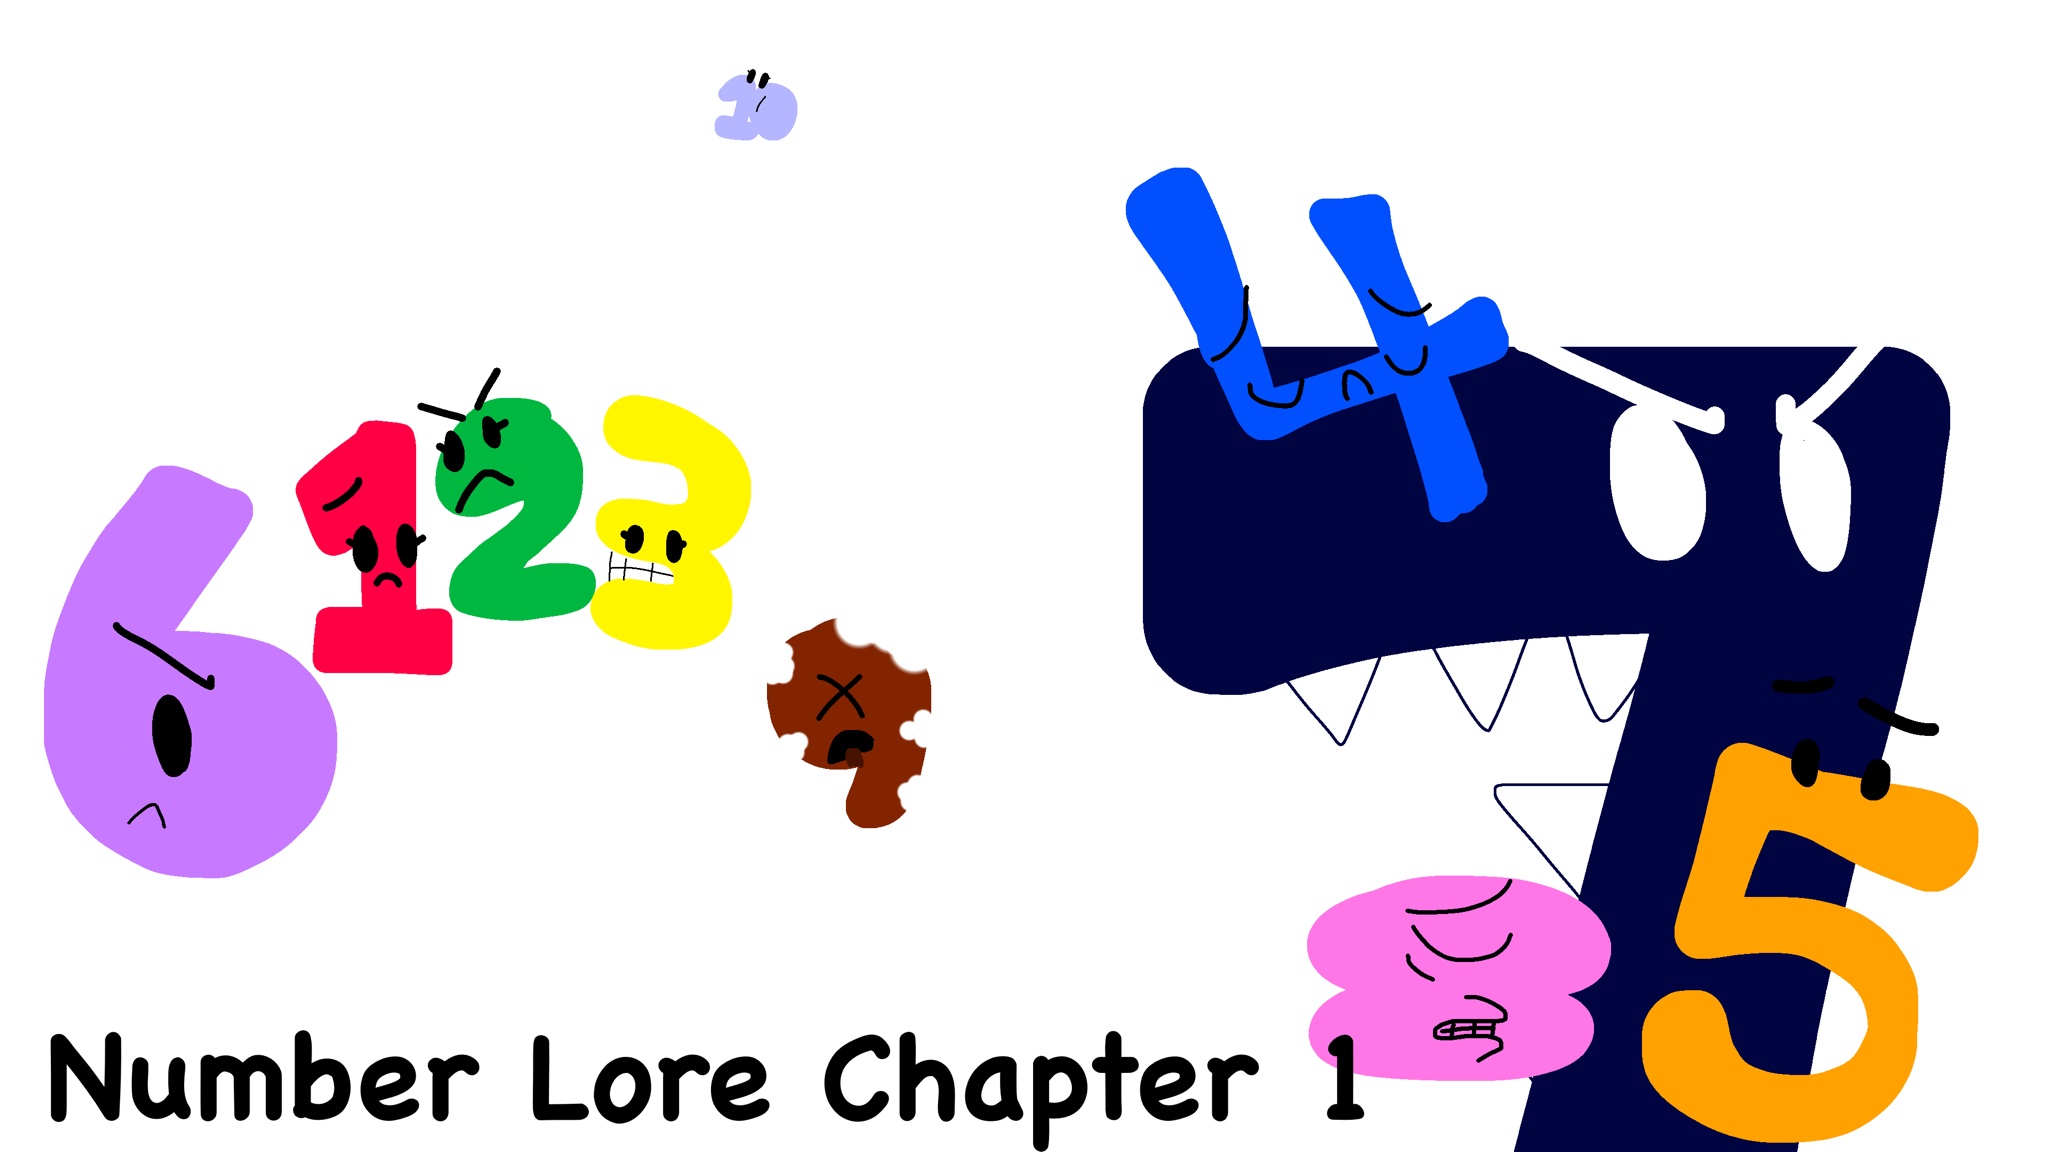 3  Number Lore 